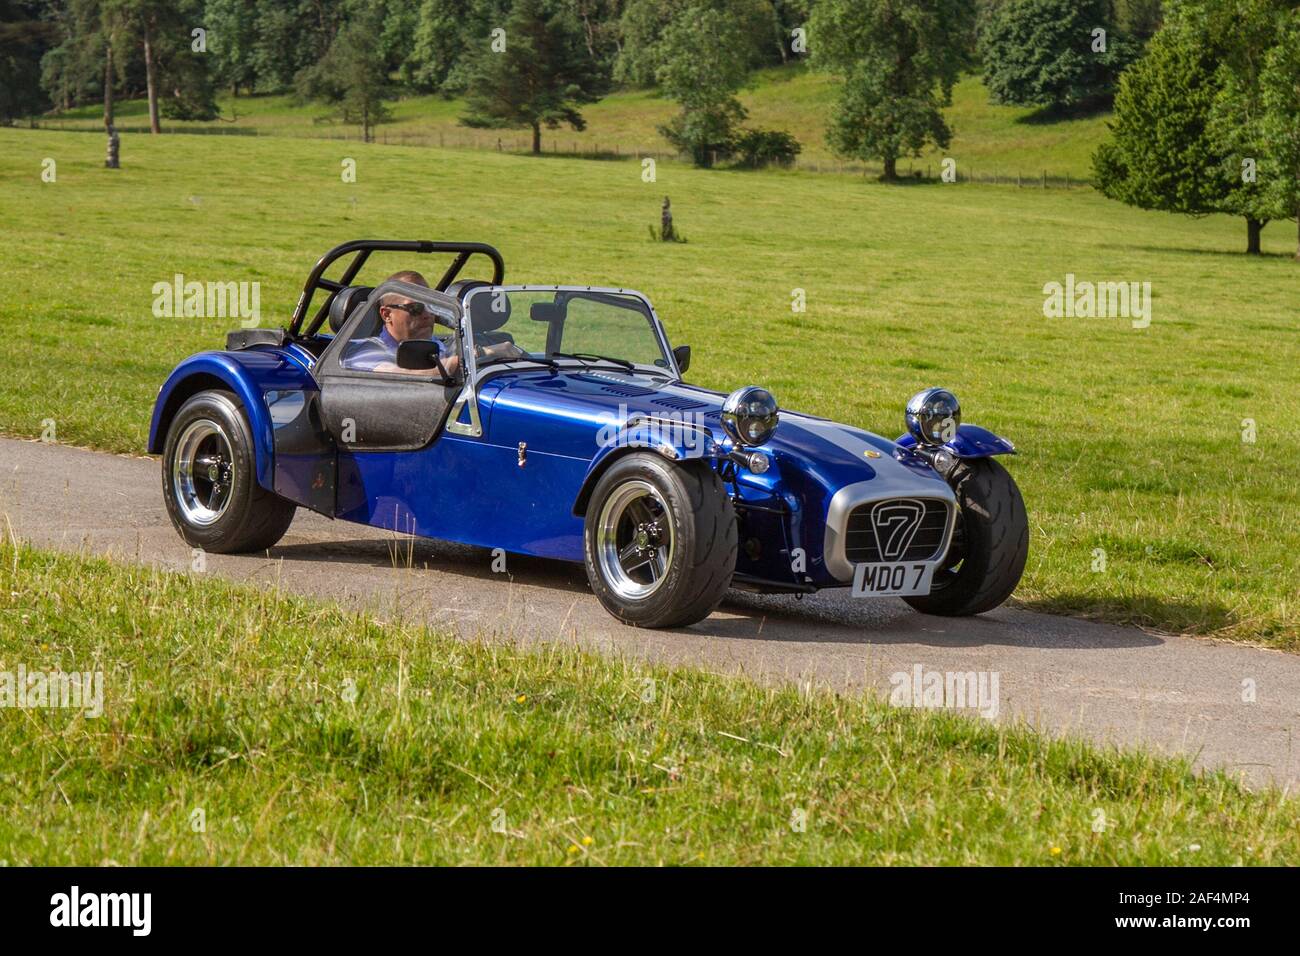 2001 Blue Silver Caterham 7; Classic cars, historics, cherished, old timers, collectable restored vintage veteran, vehicles of yesteryear arriving for the Mark Woodward historical motoring event at Leighton Hall, Carnforth, UK Stock Photo